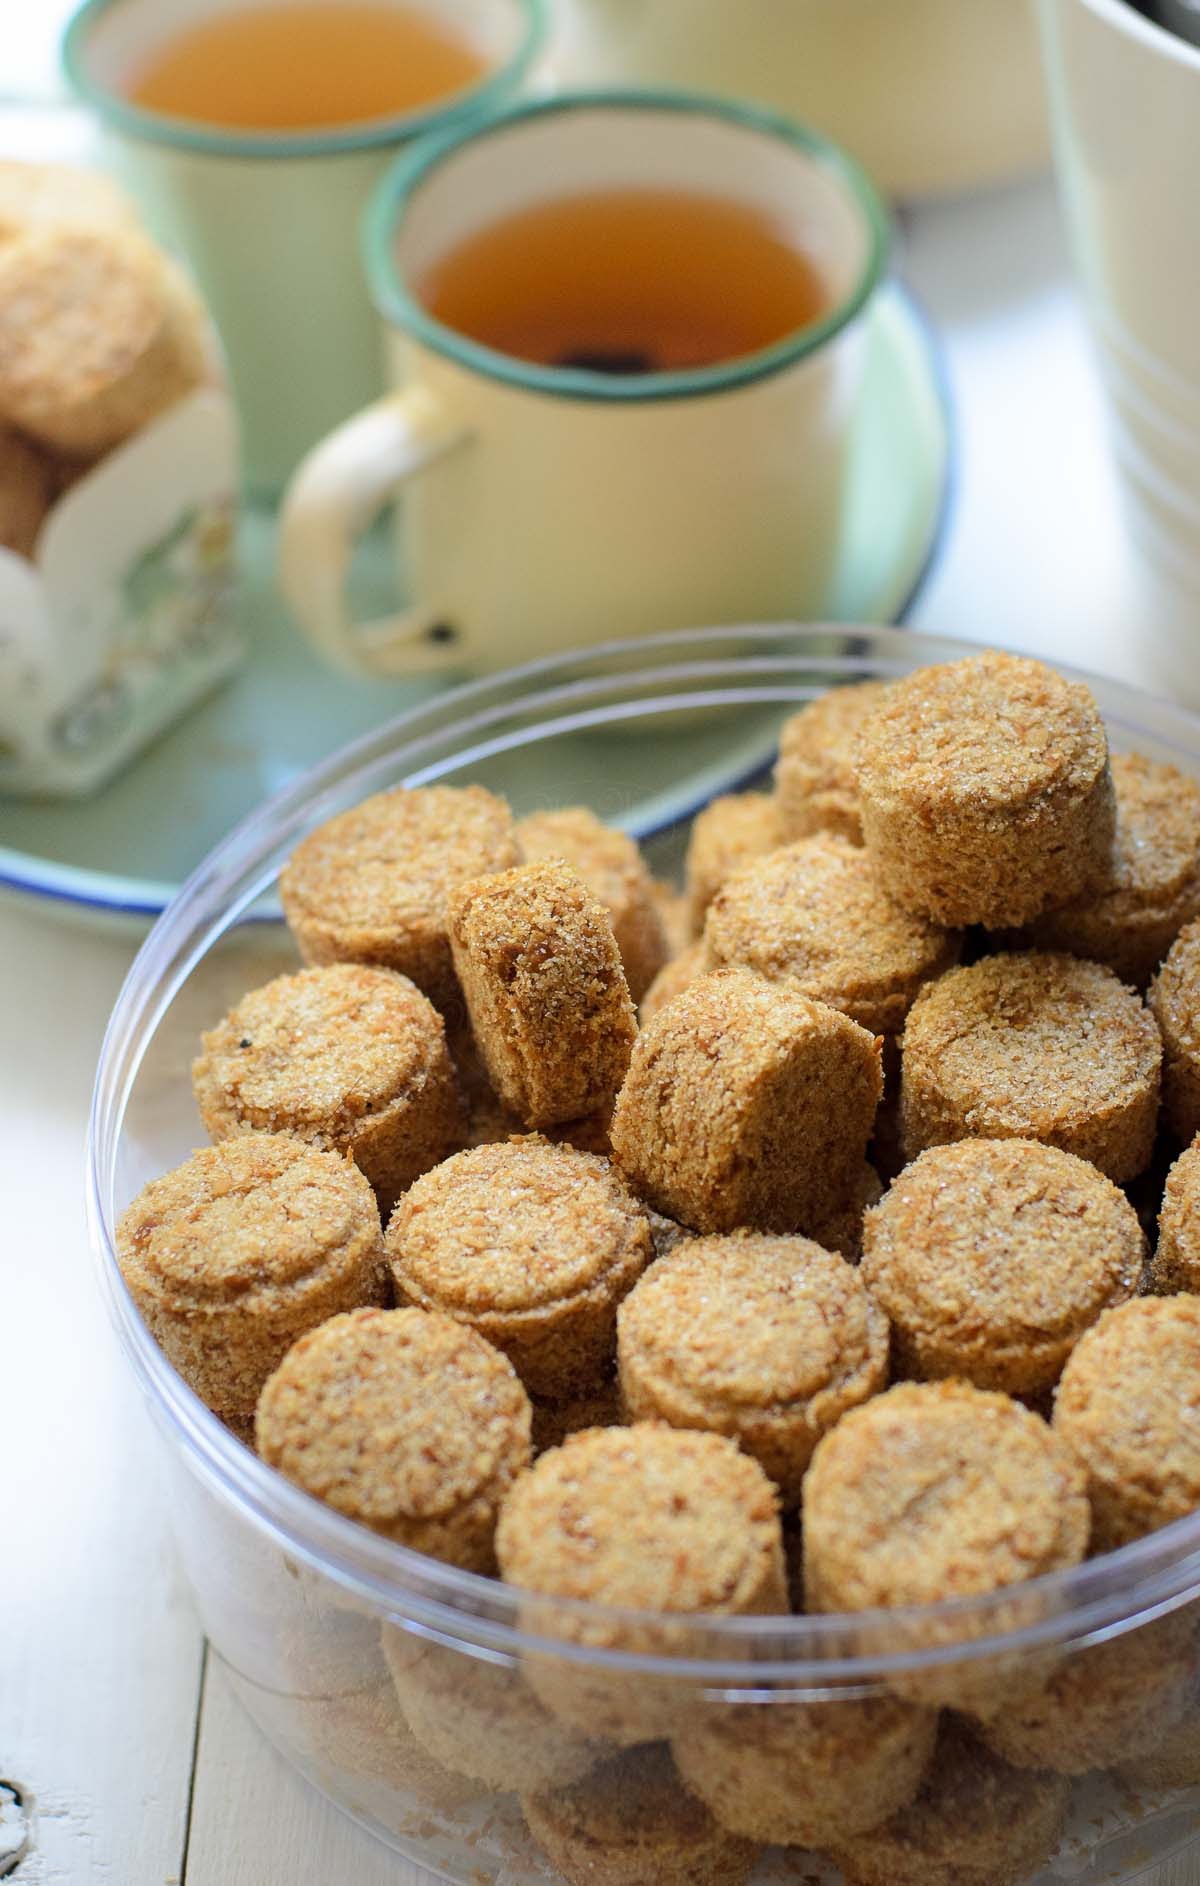 coconut cookies/ biskut kelapa cina is very easy to make and its addictive